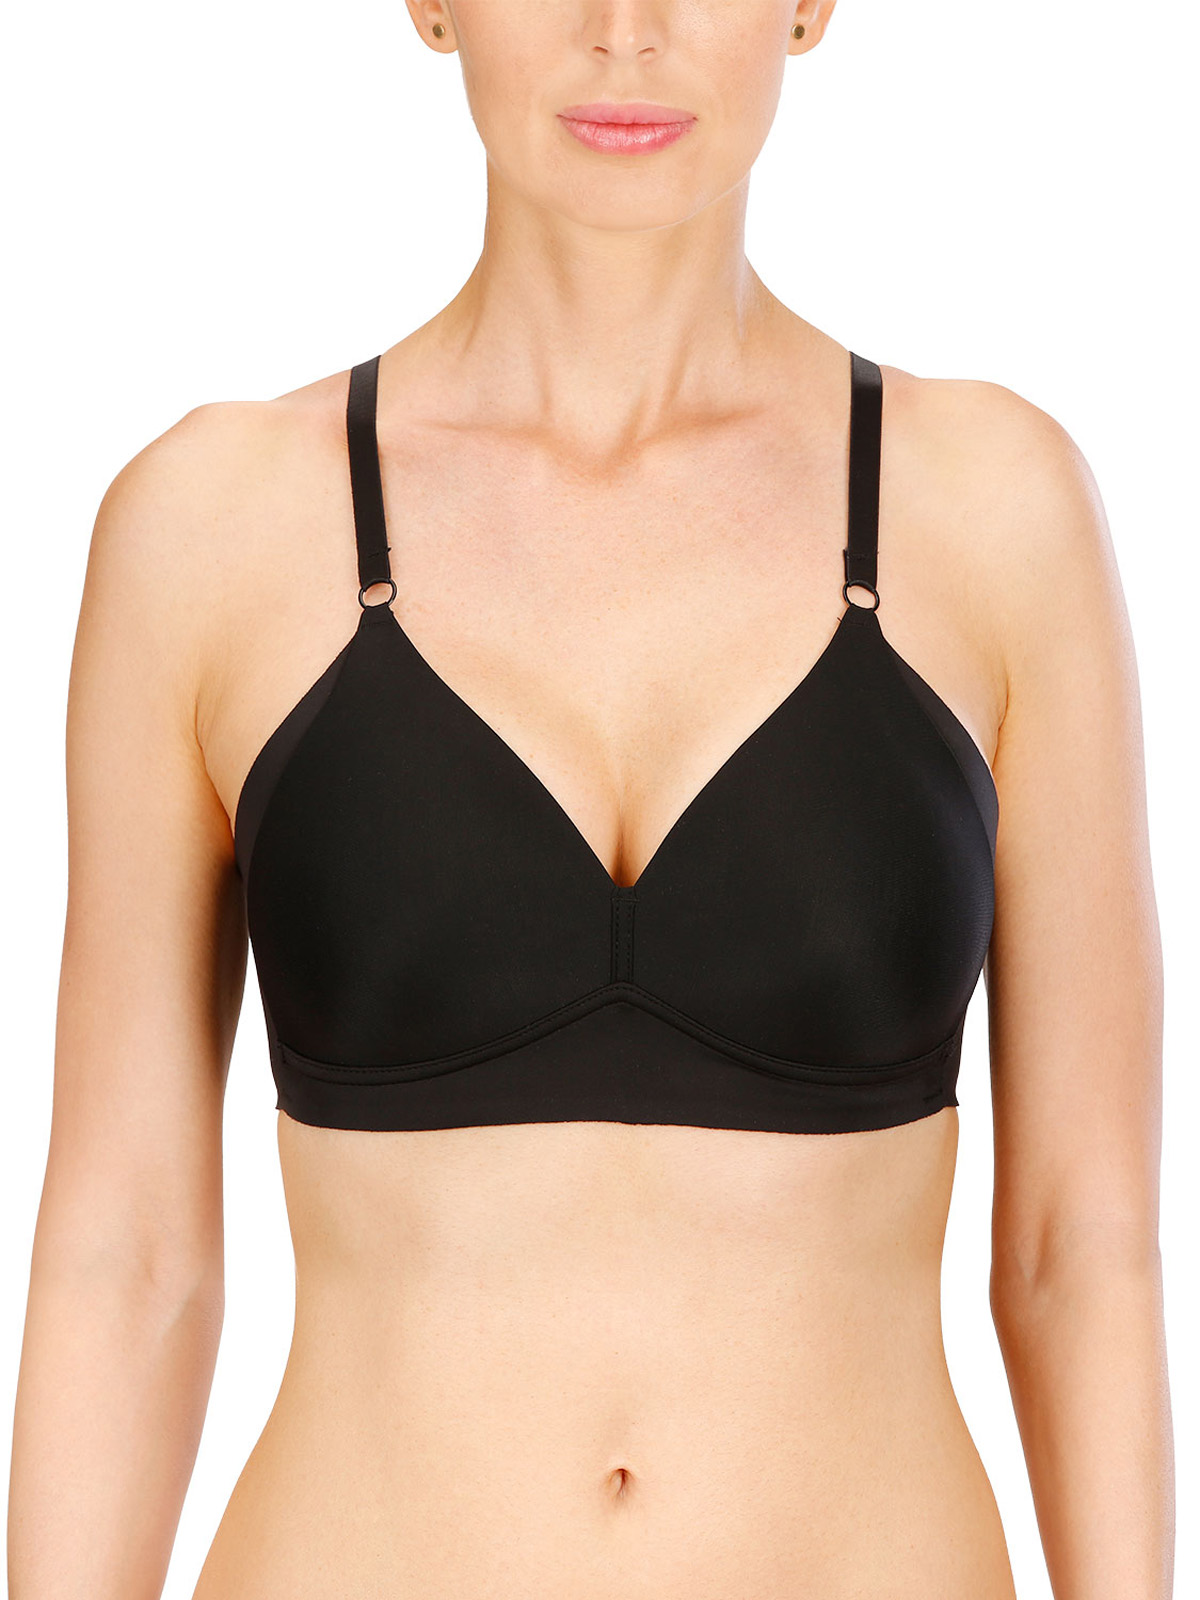 Women's Padded Seamless Non-Wired Bra 5232 Black 34 A